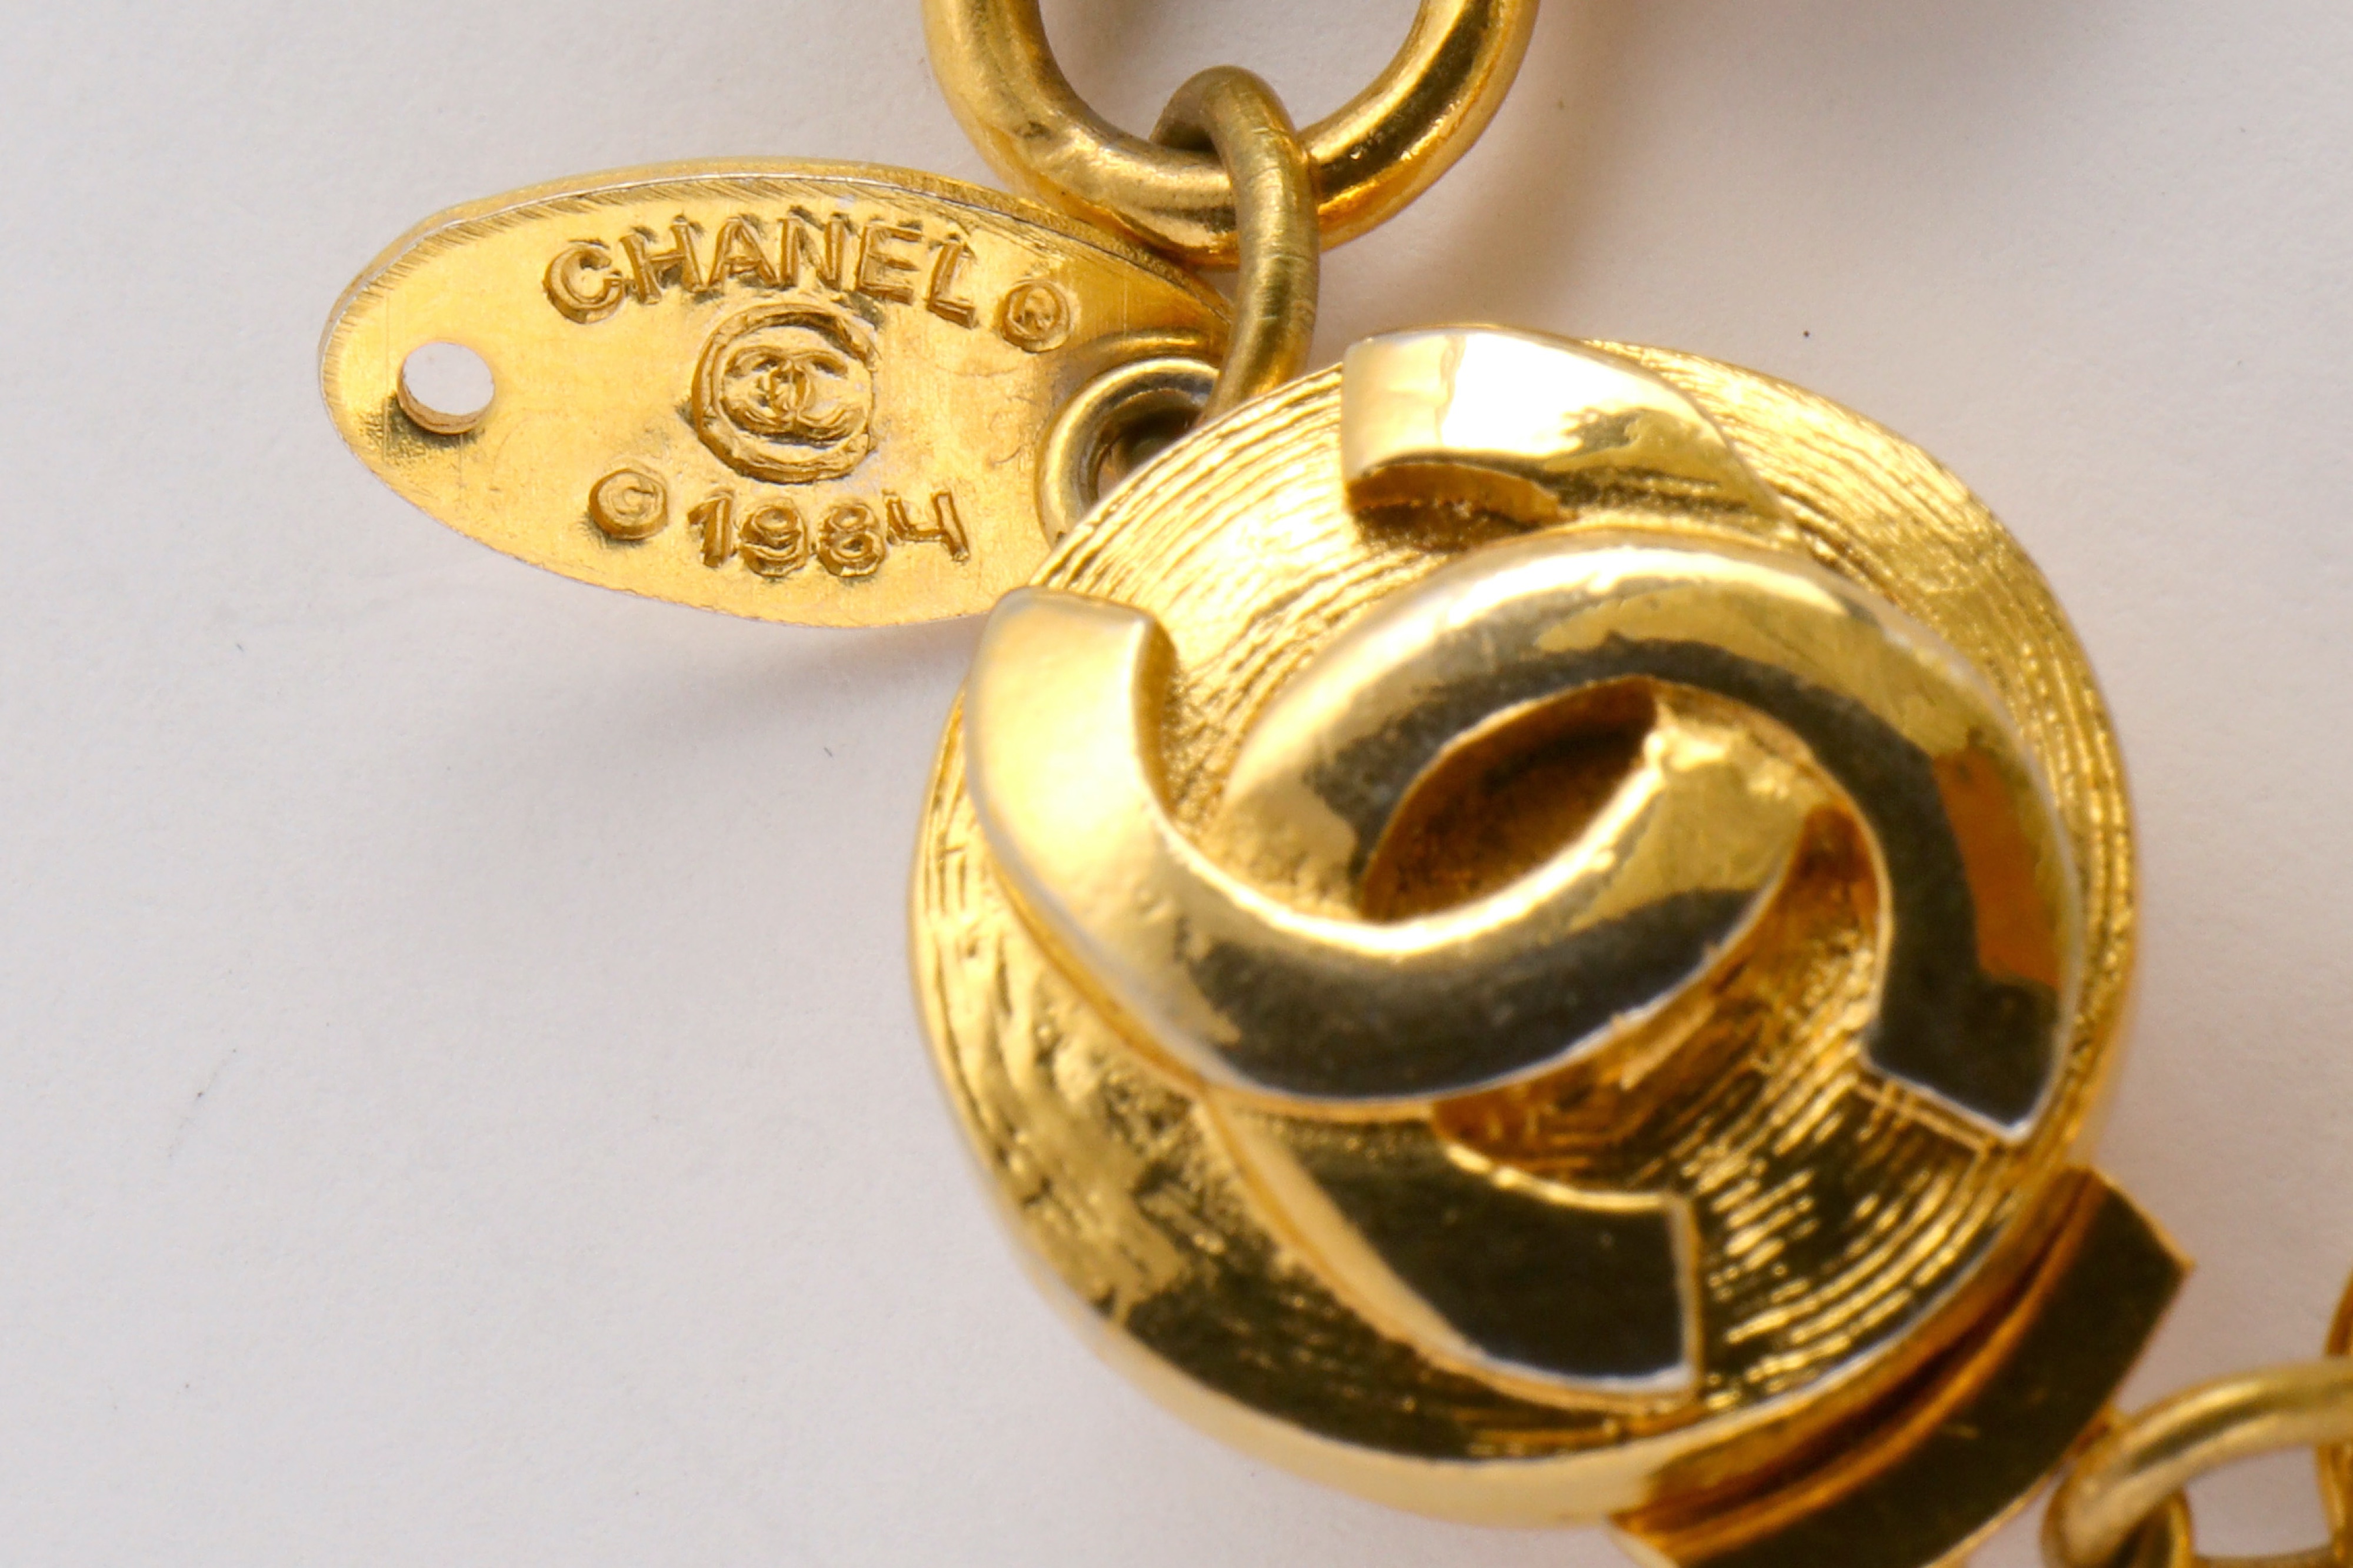 Chanel Multi Strand Necklace - Image 4 of 4